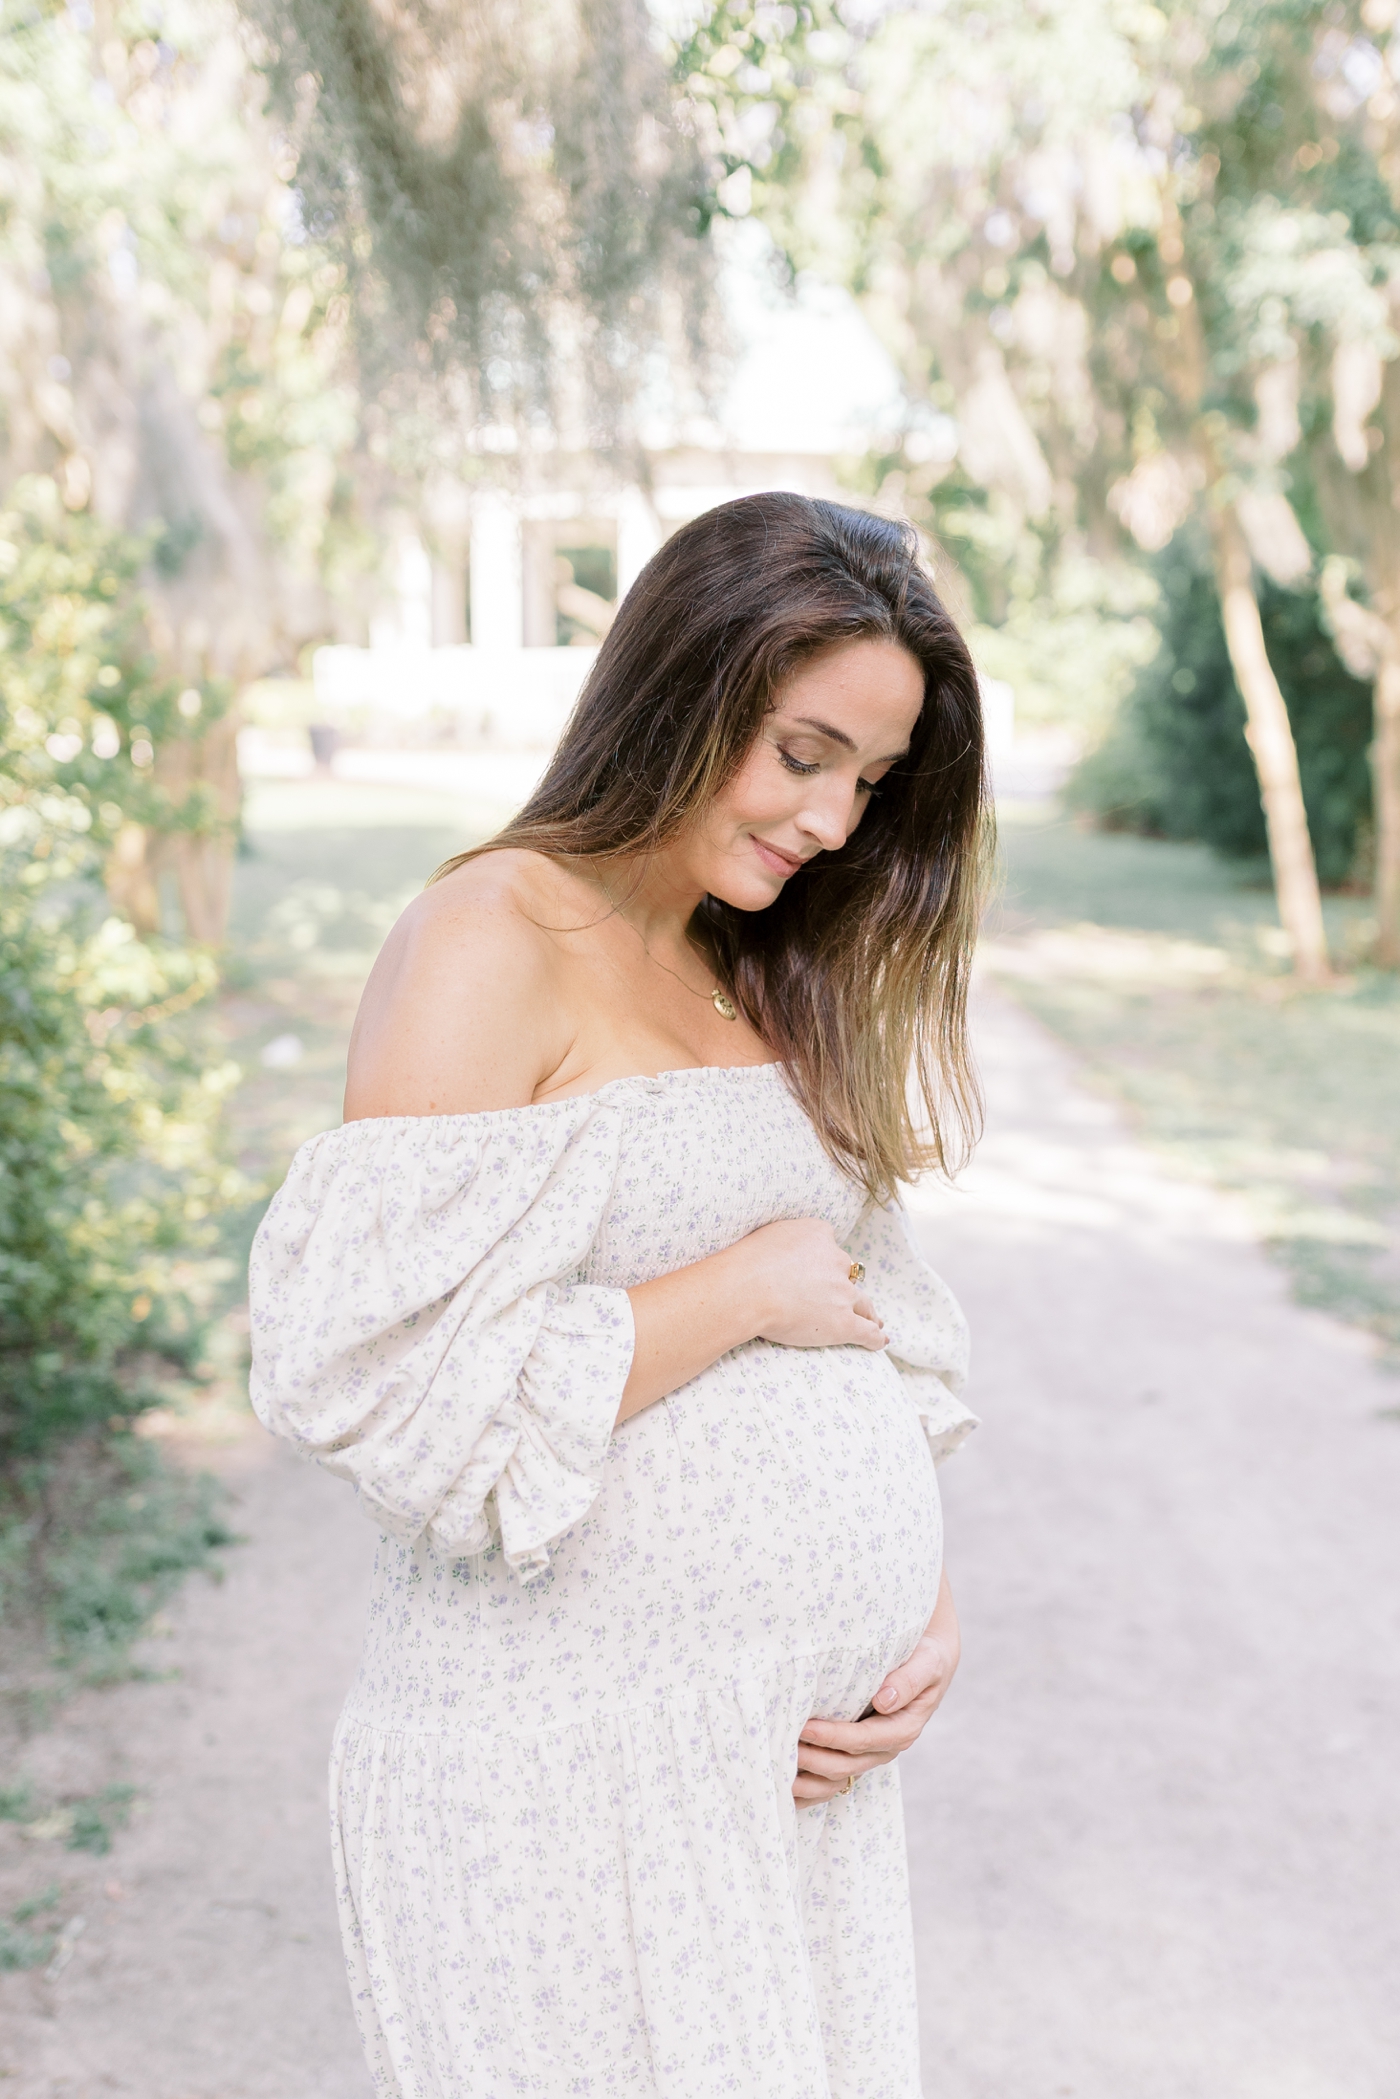 Mom to be holding her belly in the park | Photo by Caitlyn Motycka Photography.